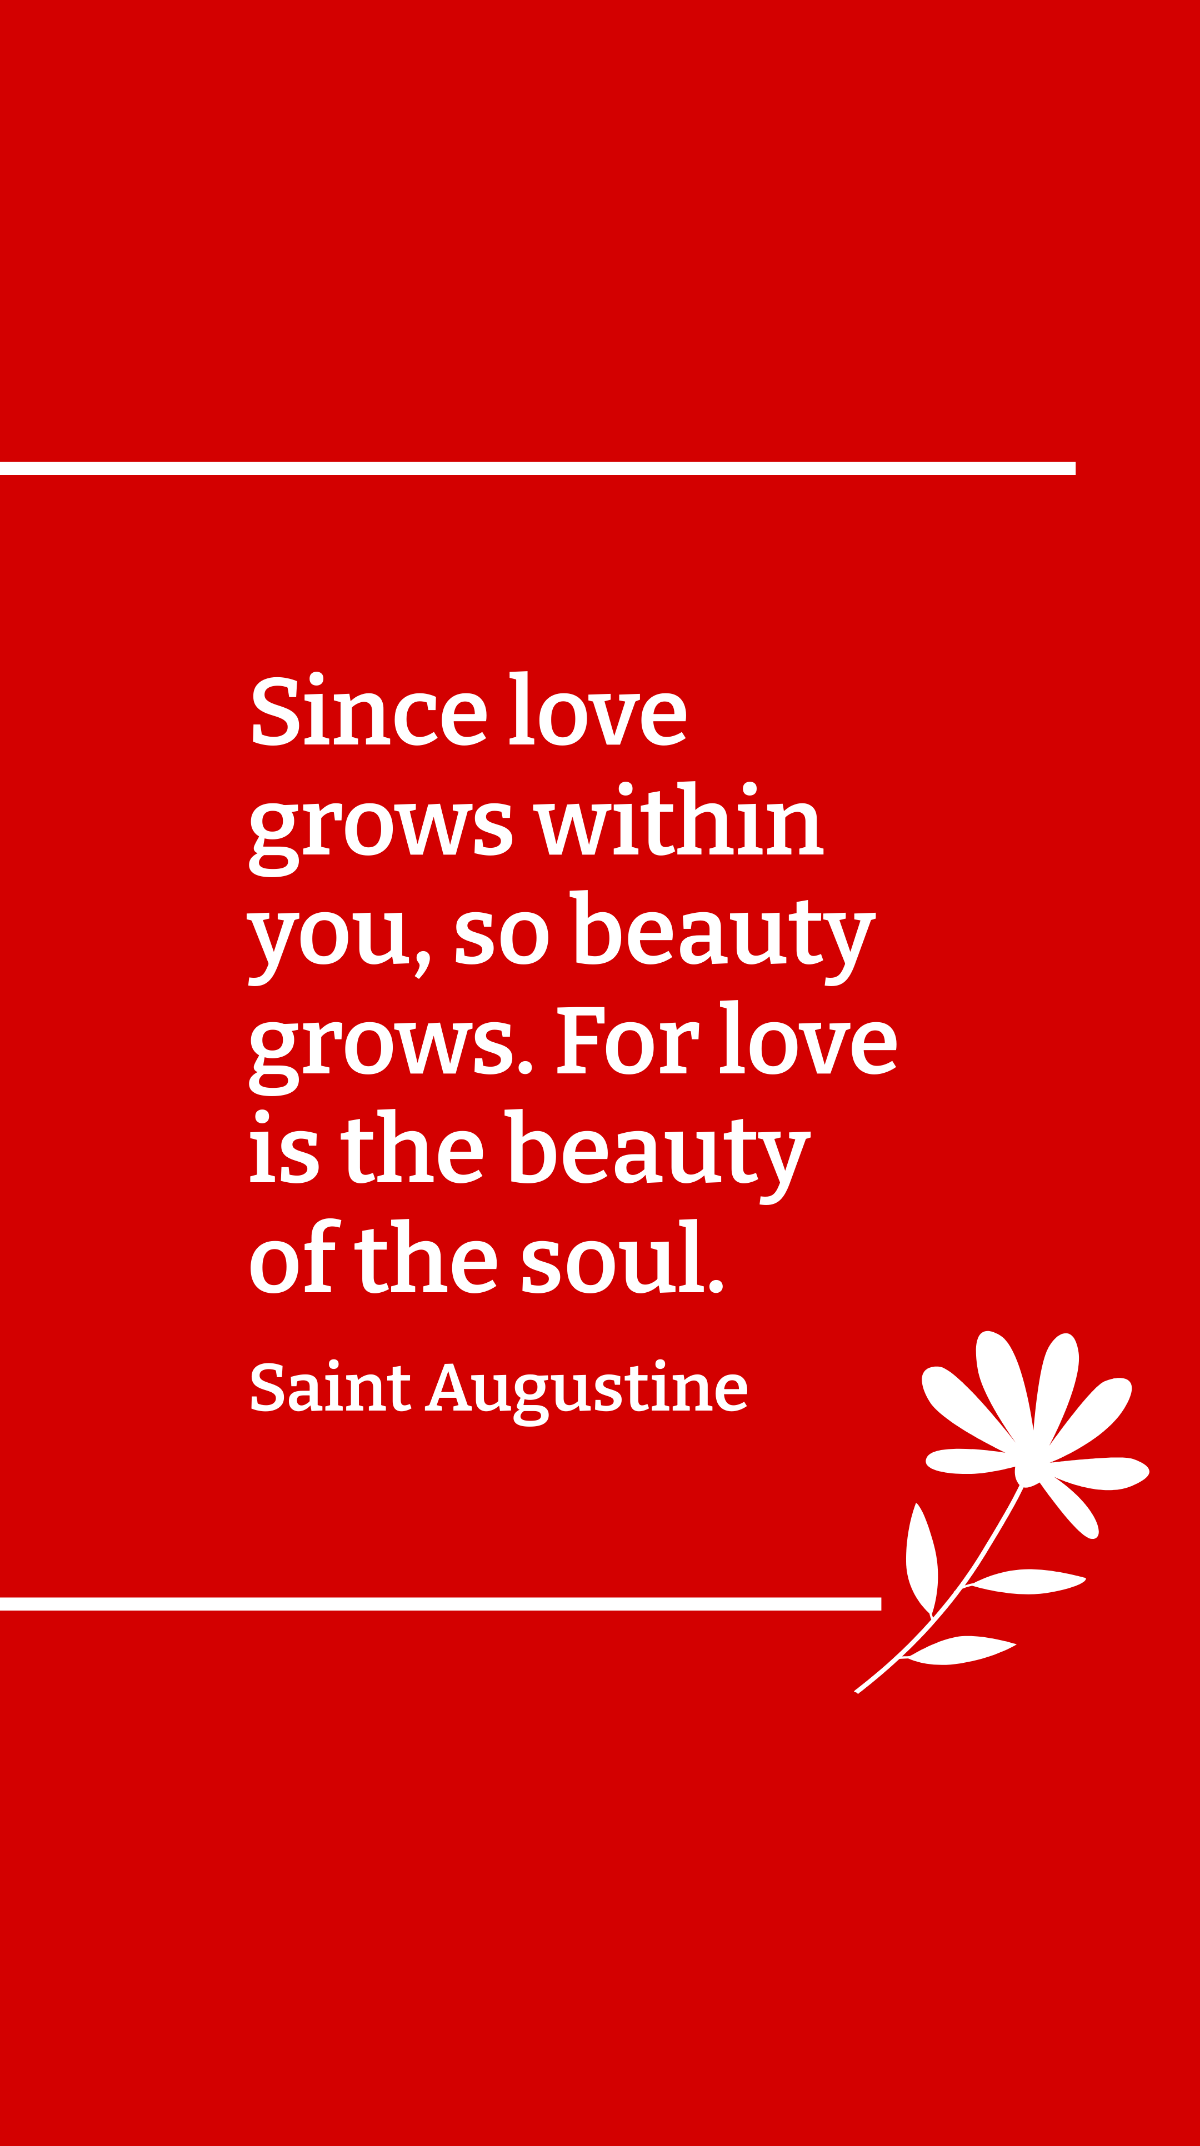 Saint Augustine - Since love grows within you, so beauty grows. For love is the beauty of the soul. Template